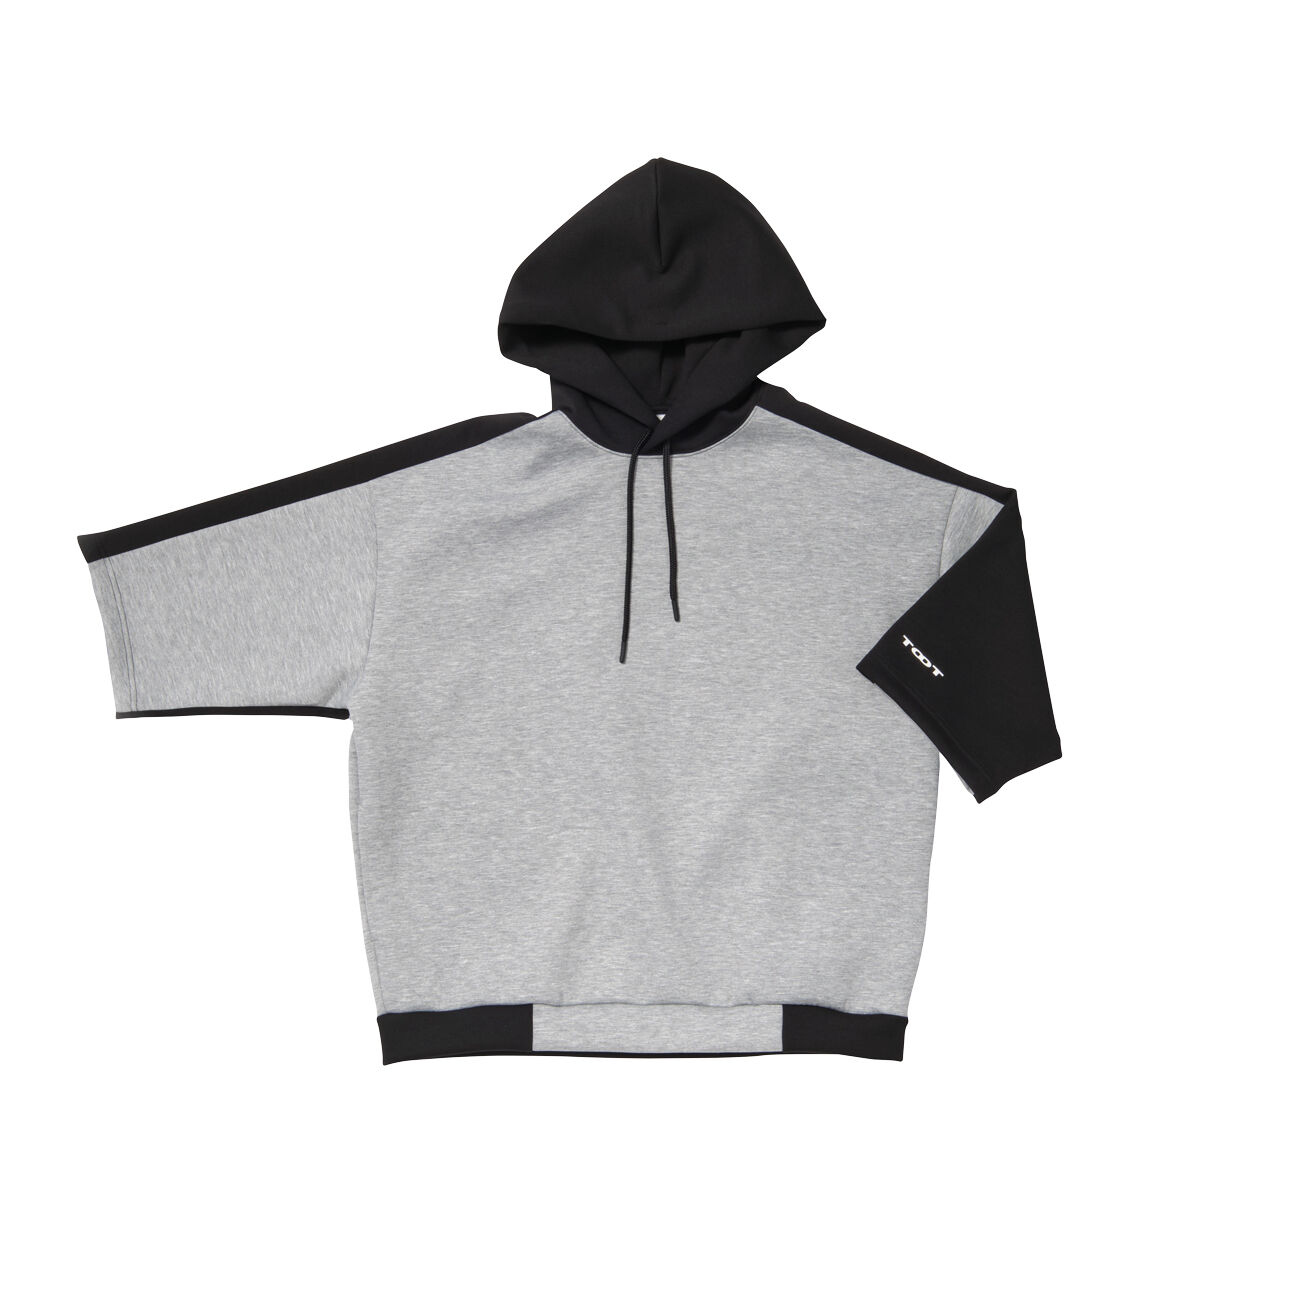 Two-tone Colored Hoodie | Men's Underwear brand TOOT official website